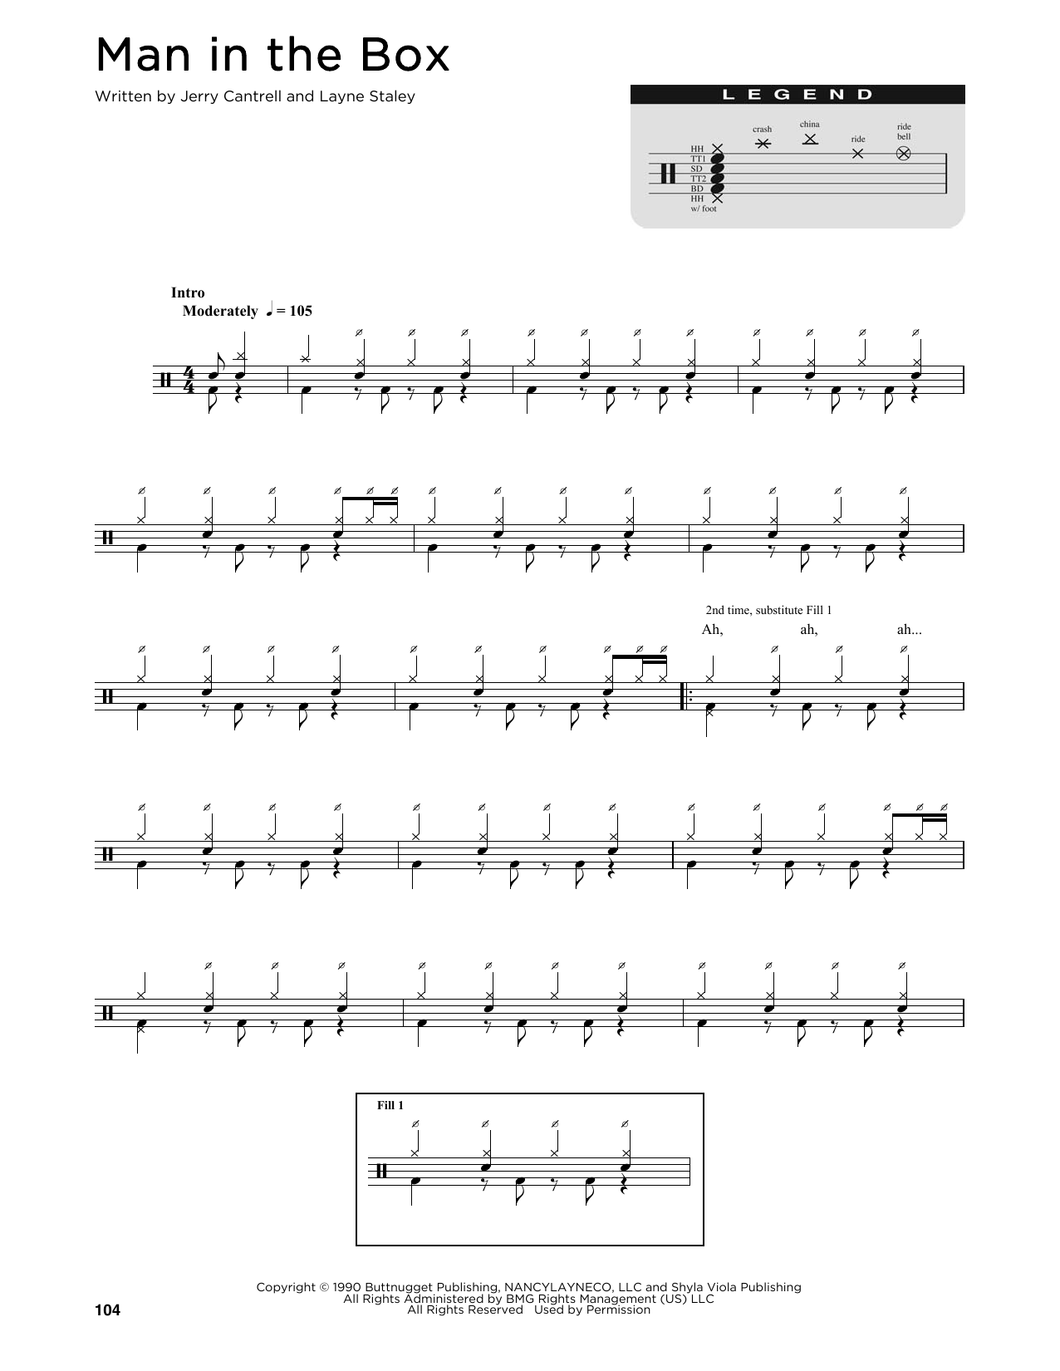 Man in the Box - Alice in Chains - Full Drum Transcription / Drum Sheet Music - SheetMusicDirect D